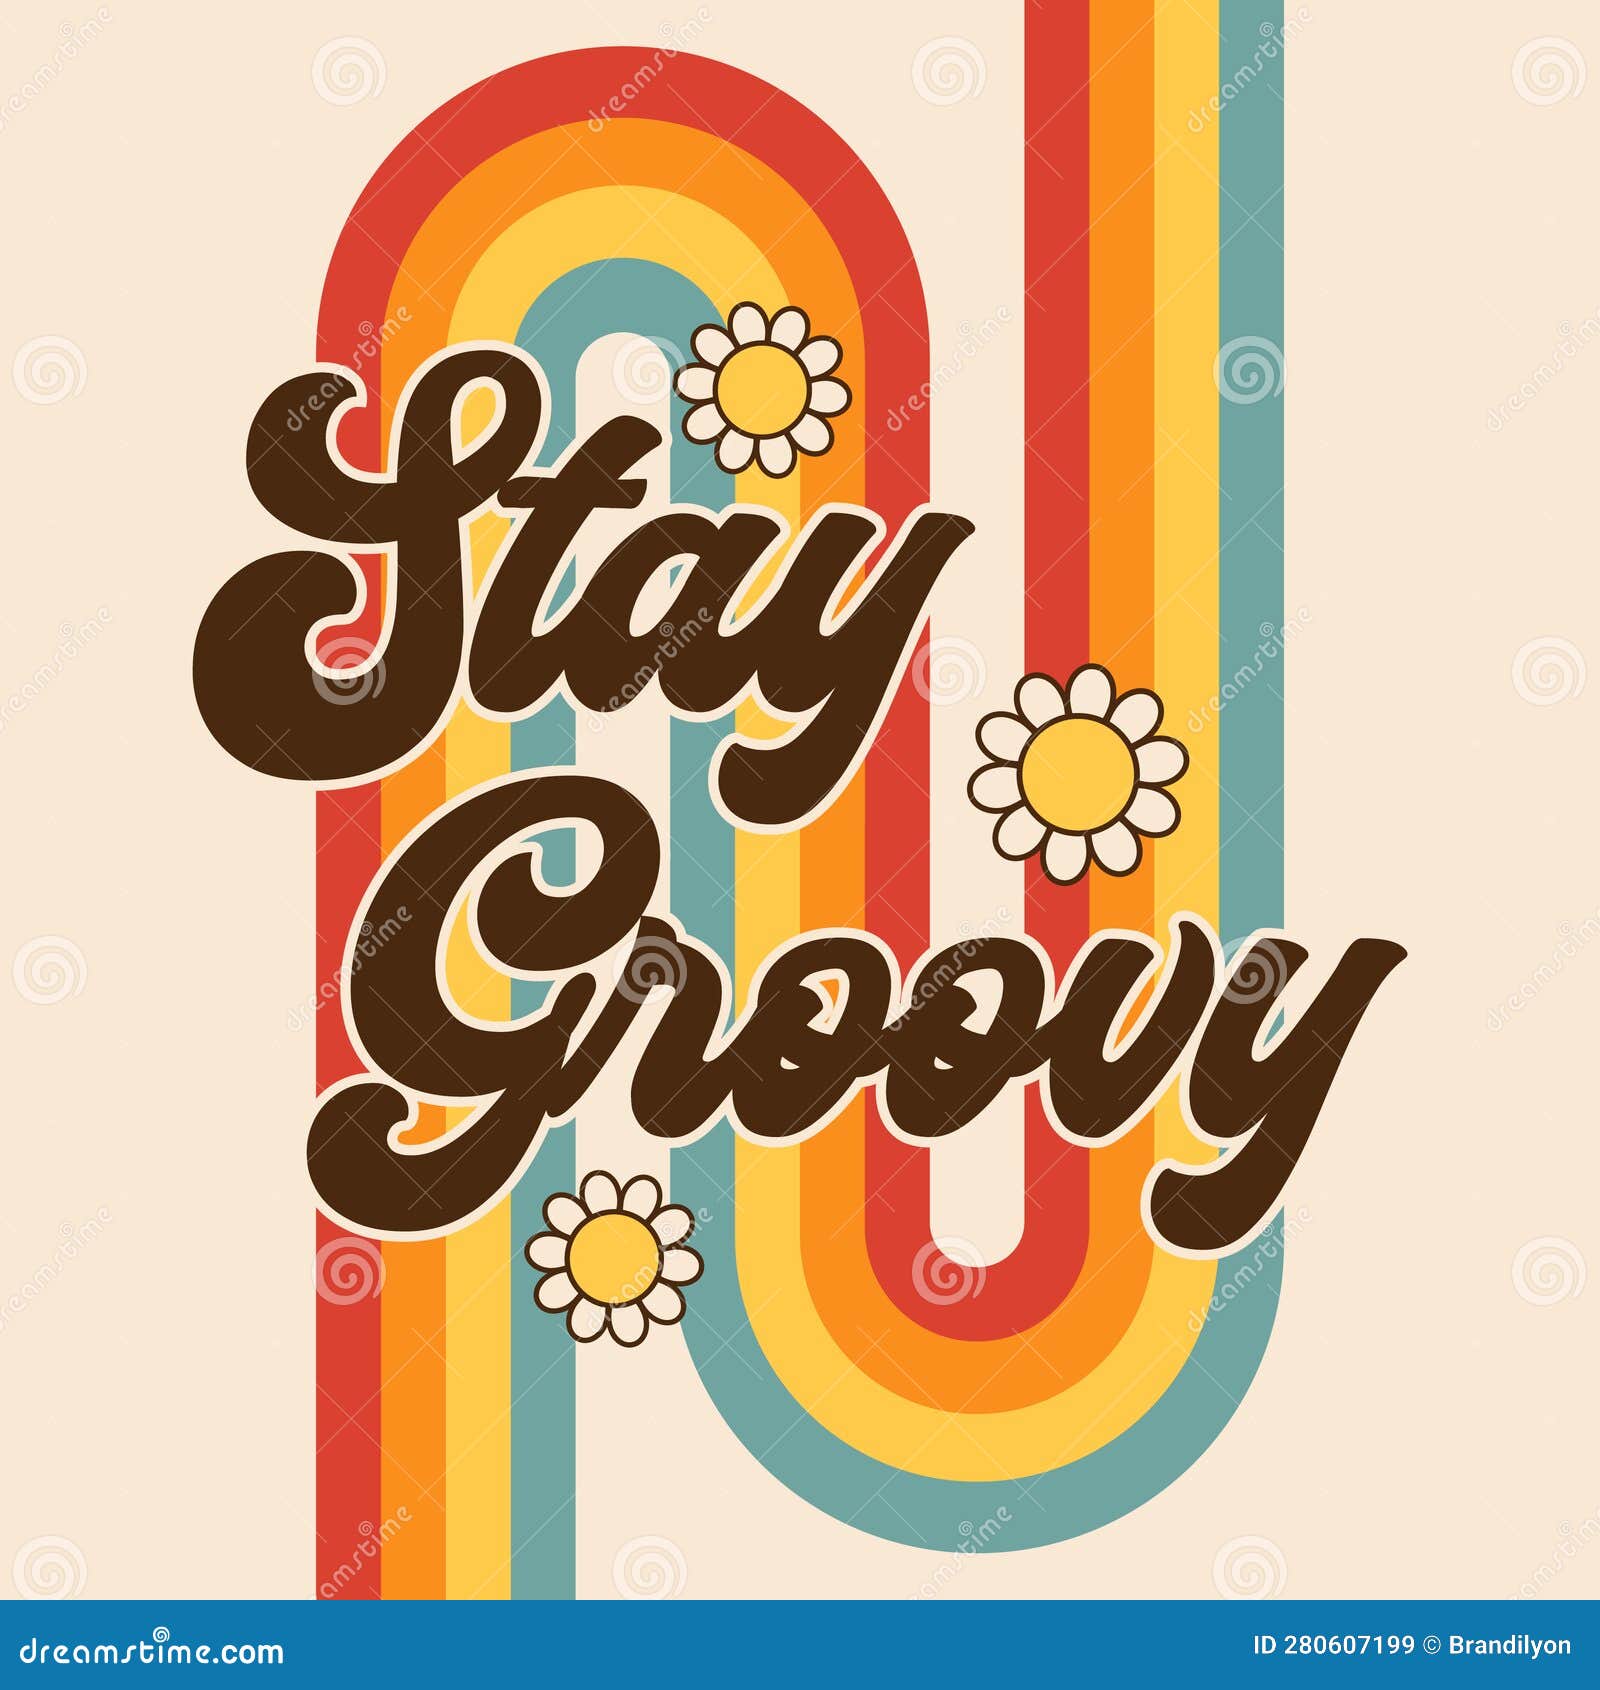 Stay Positive // Rainbow In Space Vintage Style